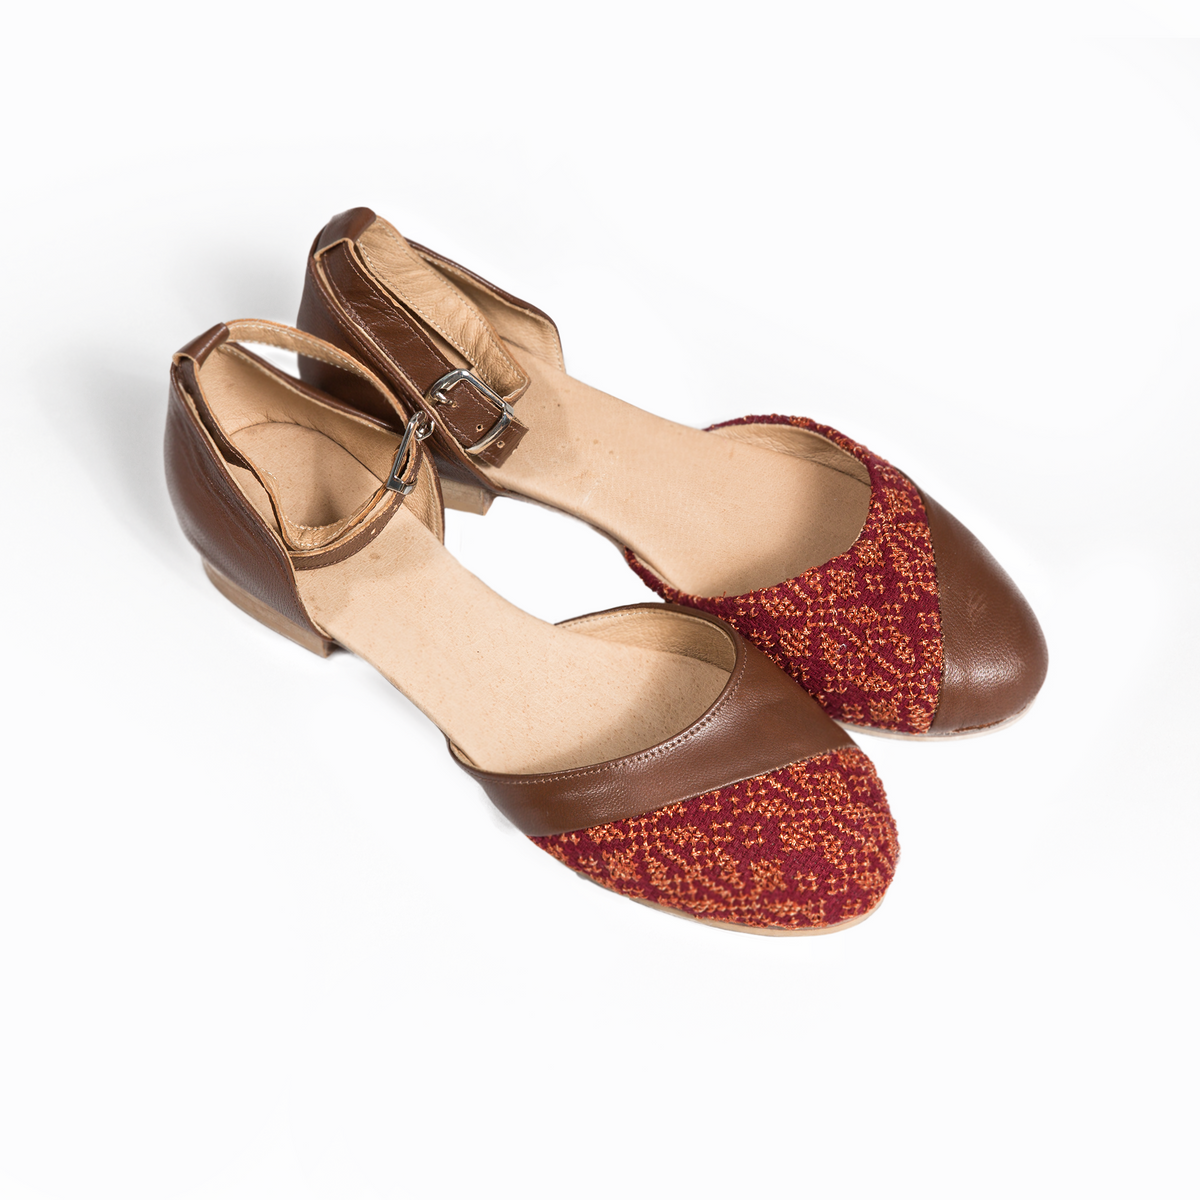 Shop Tatreez Hand-Embroidered Shoes for Women - Darzah